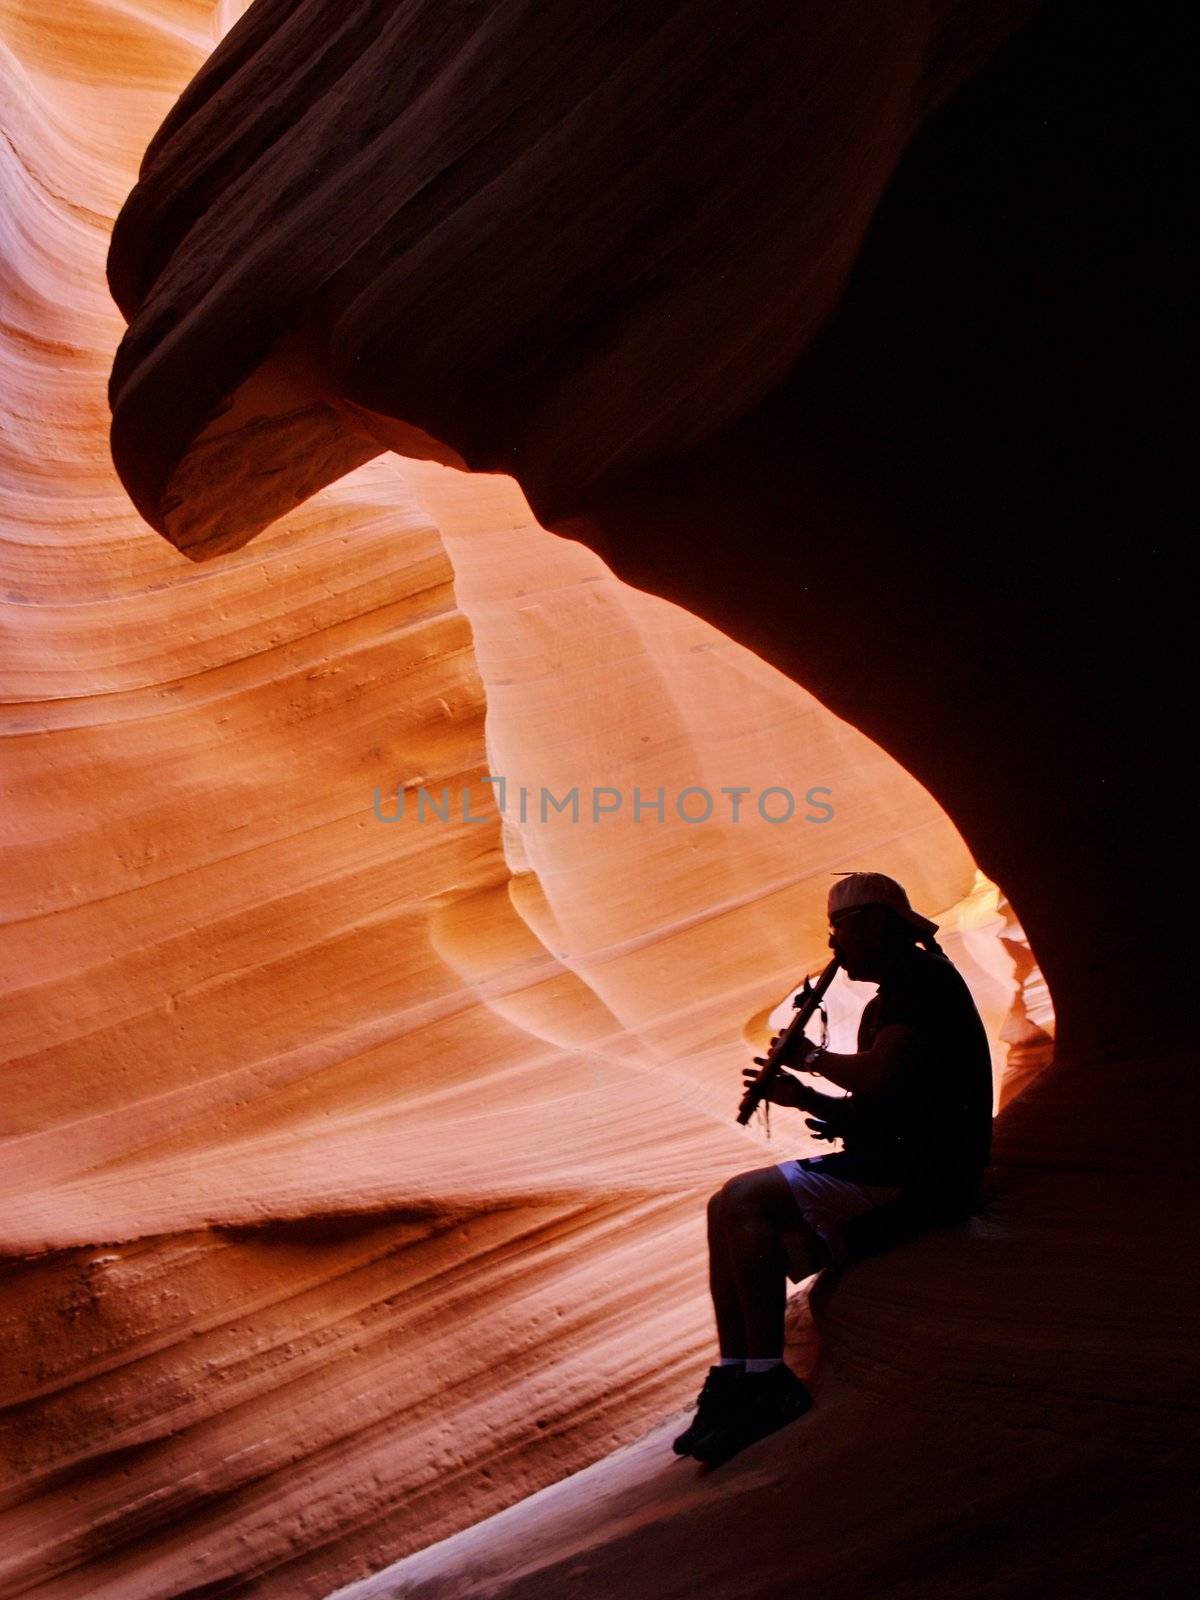 Navajo inidian playin on flute in Antelope Canyon by anderm